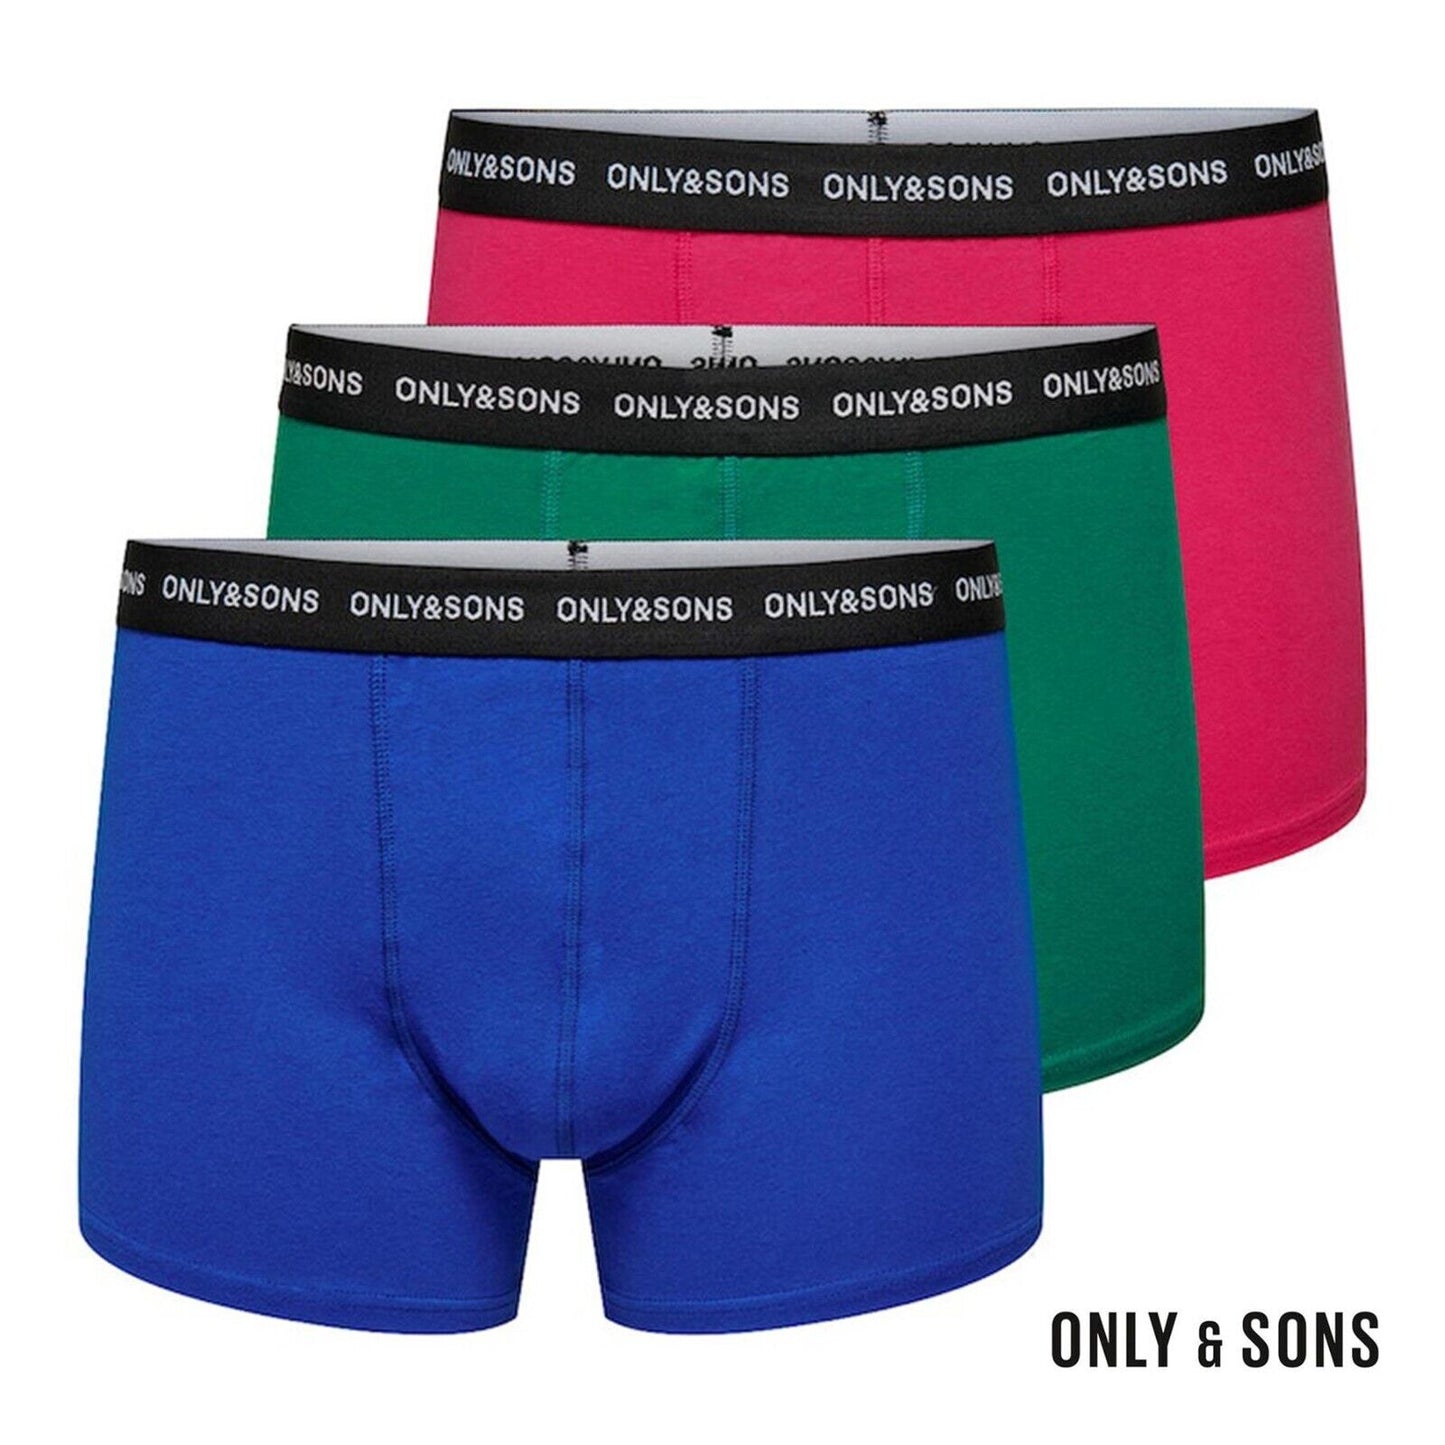 3-12 Pack Mens Boxer Shorts Only & Sons Cotton Underwear Briefs Boxers Multipack